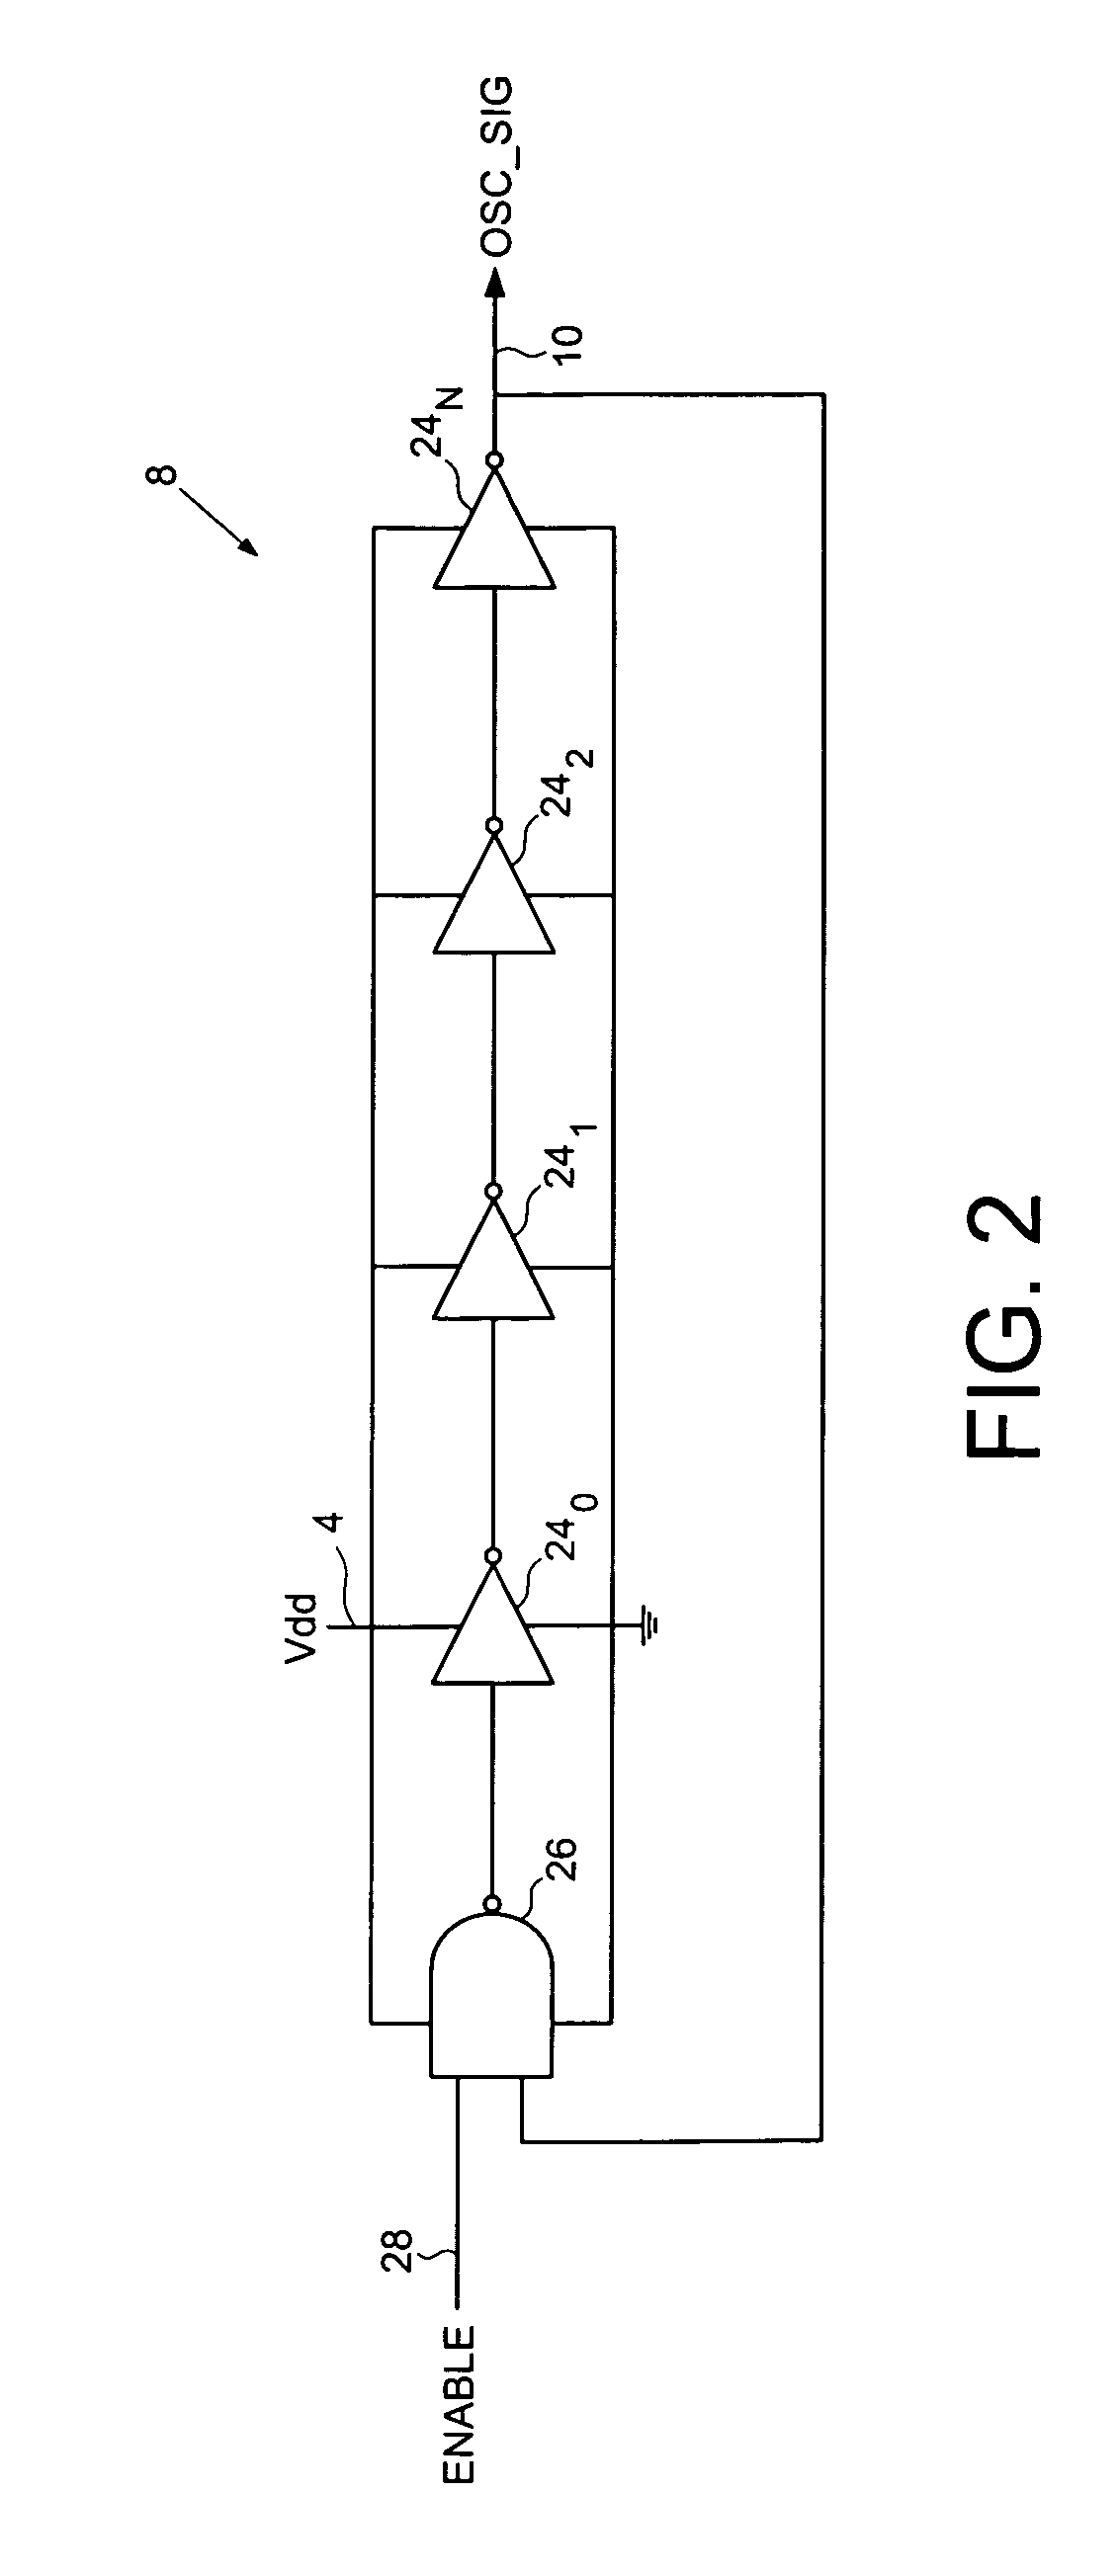 Switching voltage regulator comprising a cycle comparator for dynamic voltage scaling